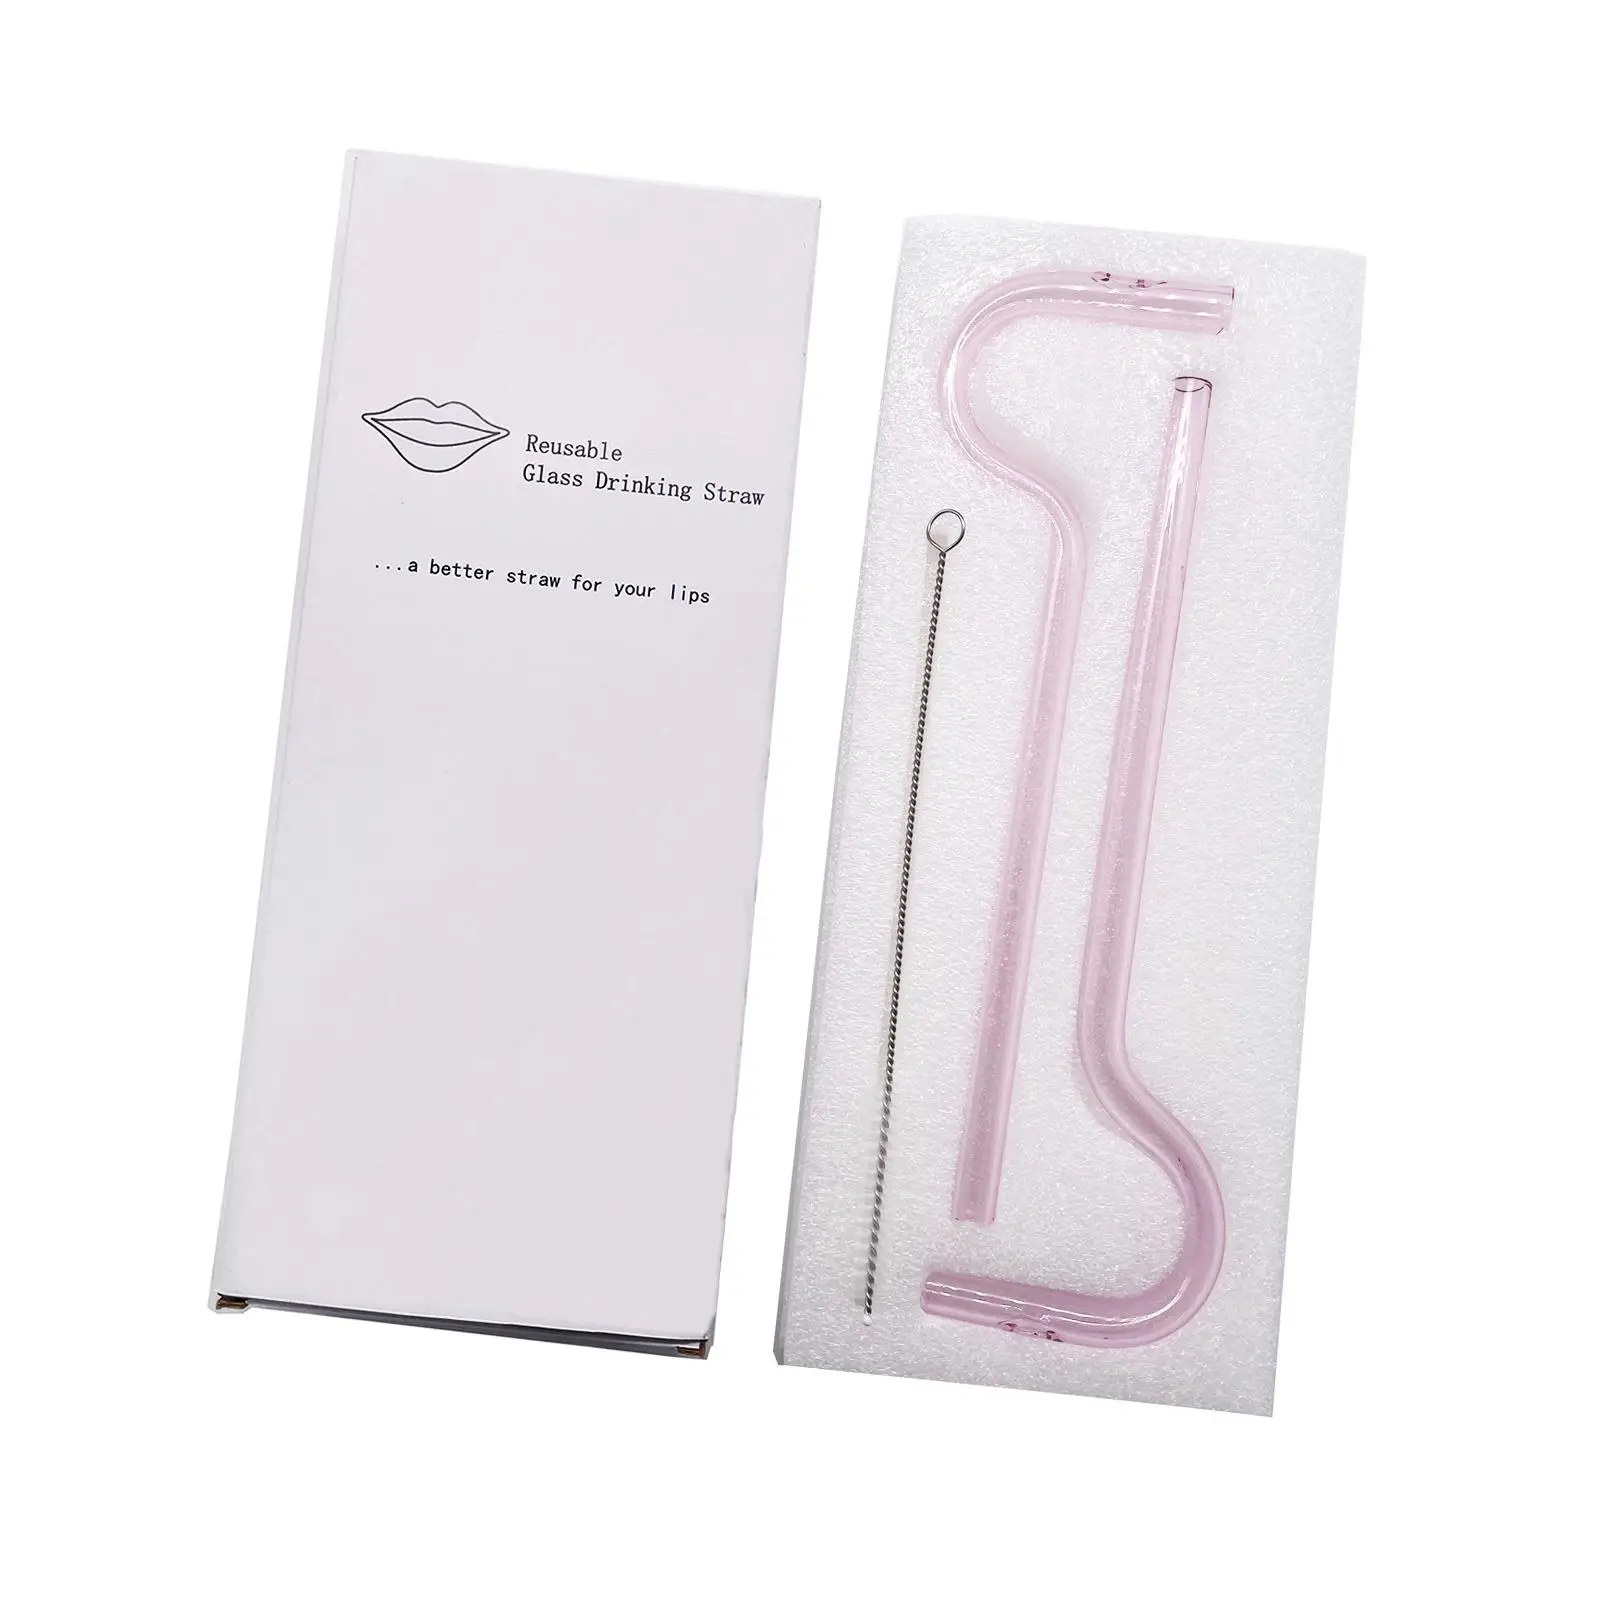 2 Pieces Glass Drinking Straws Pipe Glass Straws for Water Juice Iced Tea Hot and Cold Drinks